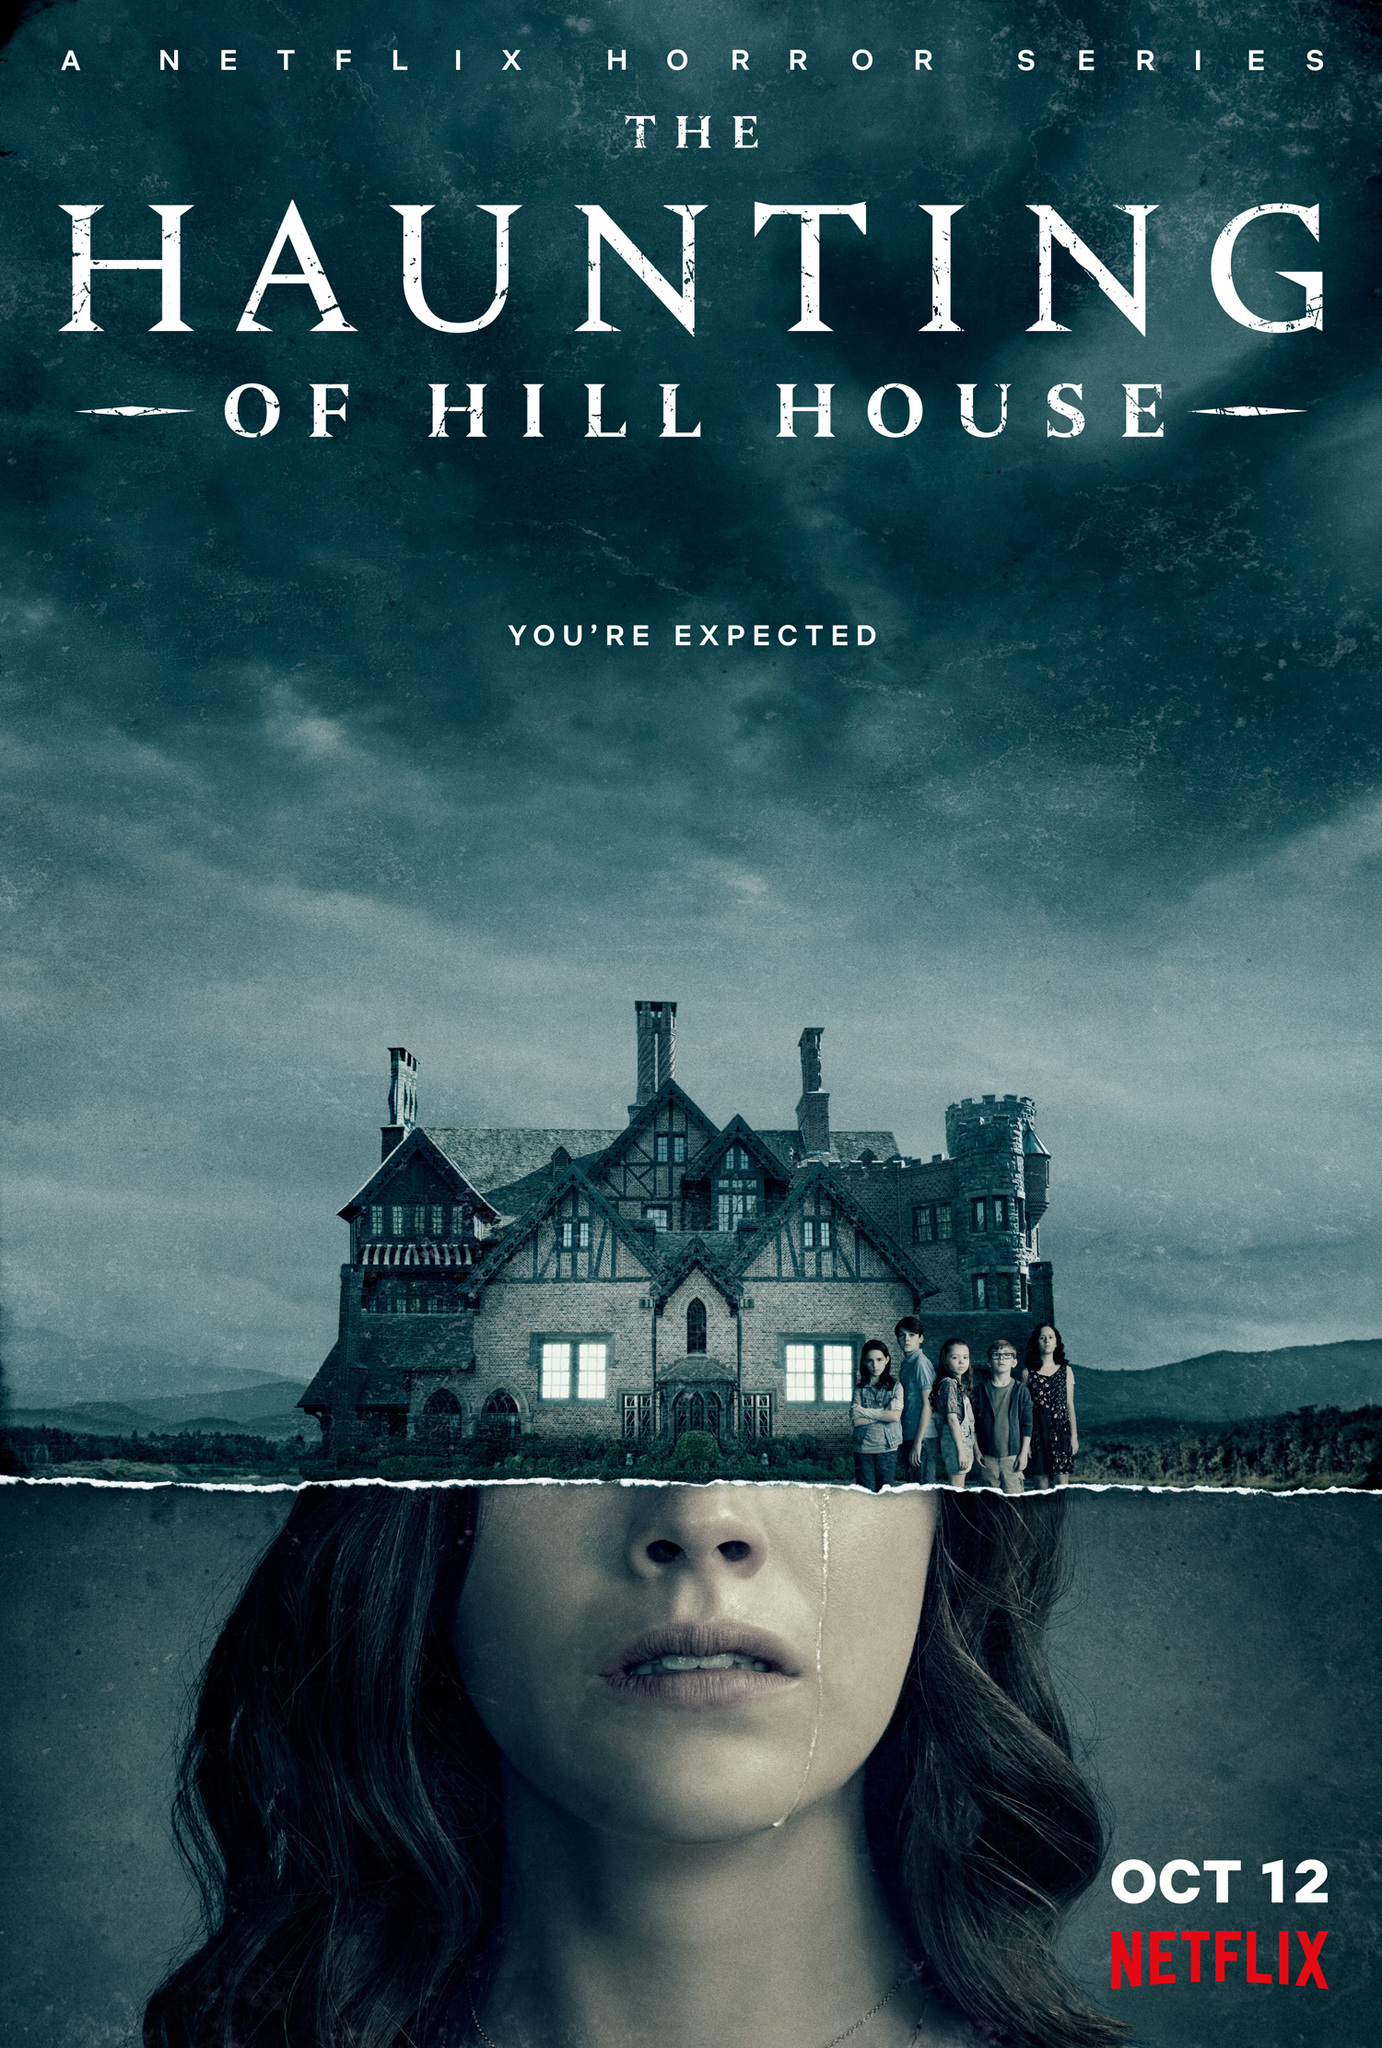 See The Haunting of Hill House in Library Catalog